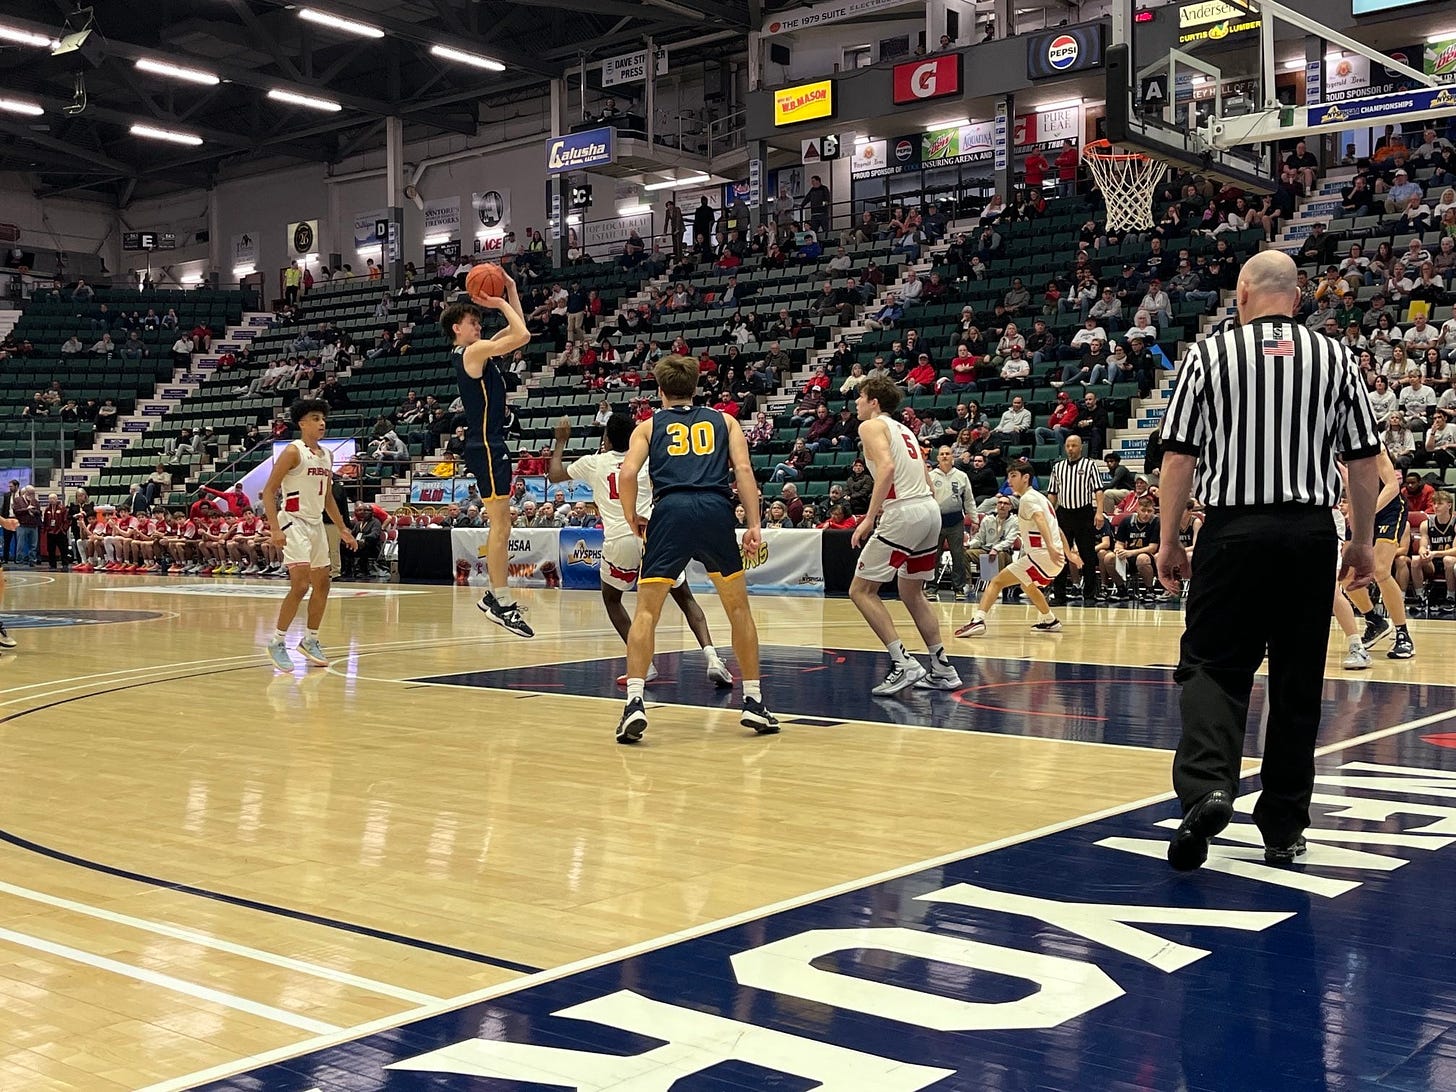 STATE CHAMPIONSHIP BOUND: Cam Blankenberg's monster second half lifts Wayne  over Friends Academy in Class A semifinal | Fingerlakes1.com